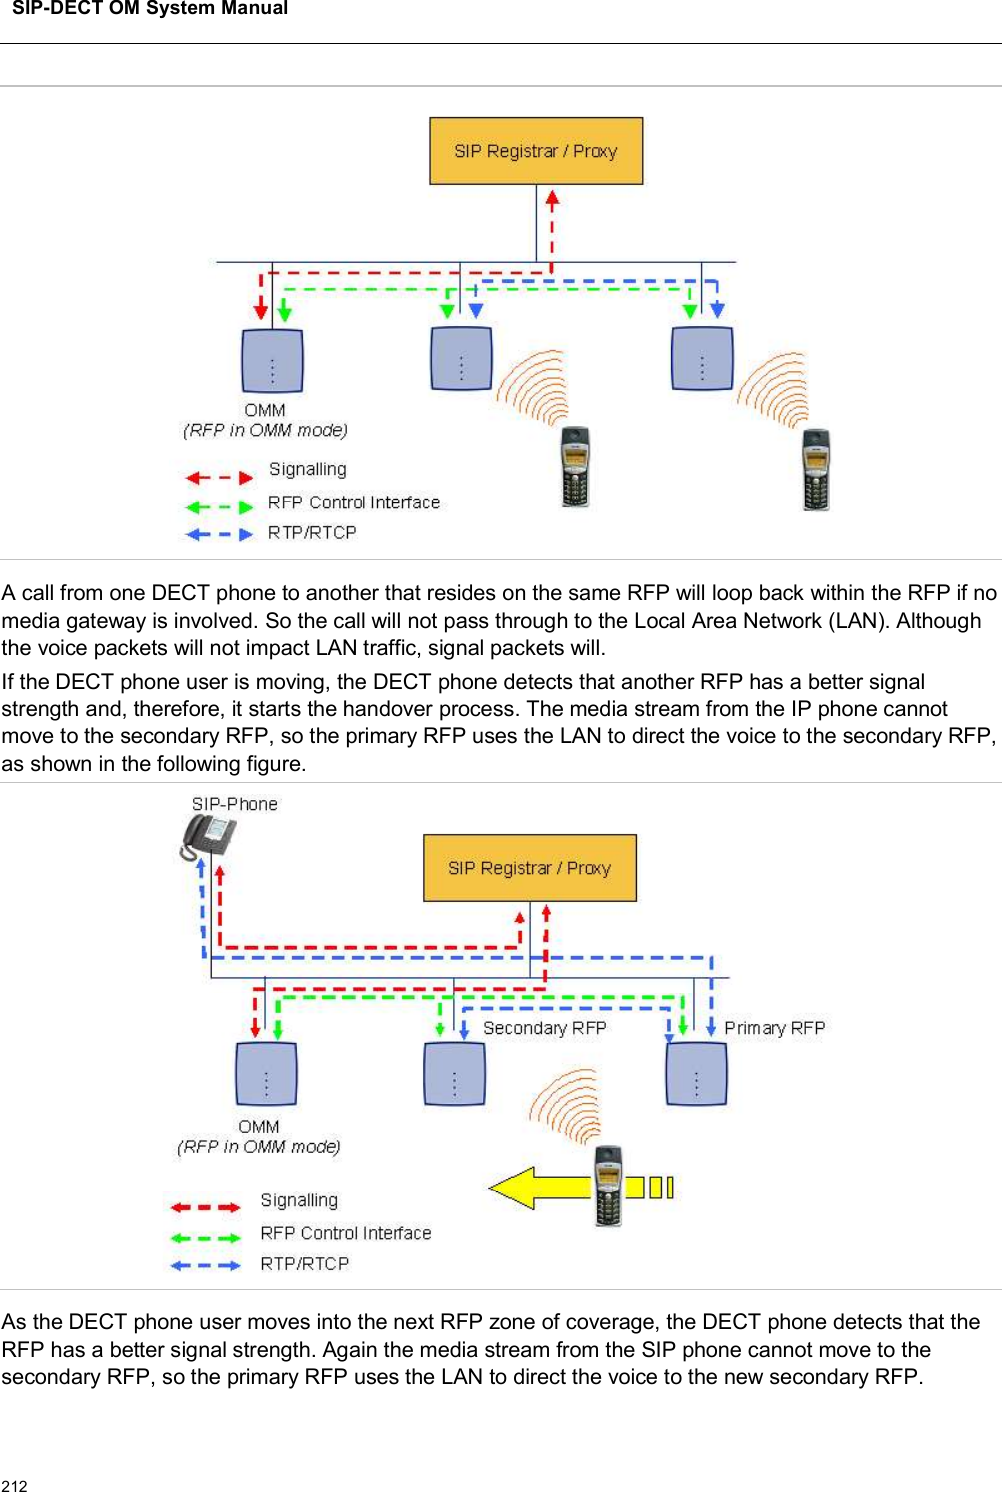 SIP-DECT OM System Manual212A call from one DECT phone to another that resides on the same RFP will loop back within the RFP if no media gateway is involved. So the call will not pass through to the Local Area Network (LAN). Although the voice packets will not impact LAN traffic, signal packets will.If the DECT phone user is moving, the DECT phone detects that another RFP has a better signal strength and, therefore, it starts the handover process. The media stream from the IP phone cannot move to the secondary RFP, so the primary RFP uses the LAN to direct the voice to the secondary RFP, as shown in the following figure.As the DECT phone user moves into the next RFP zone of coverage, the DECT phone detects that the RFP has a better signal strength. Again the media stream from the SIP phone cannot move to the secondary RFP, so the primary RFP uses the LAN to direct the voice to the new secondary RFP.